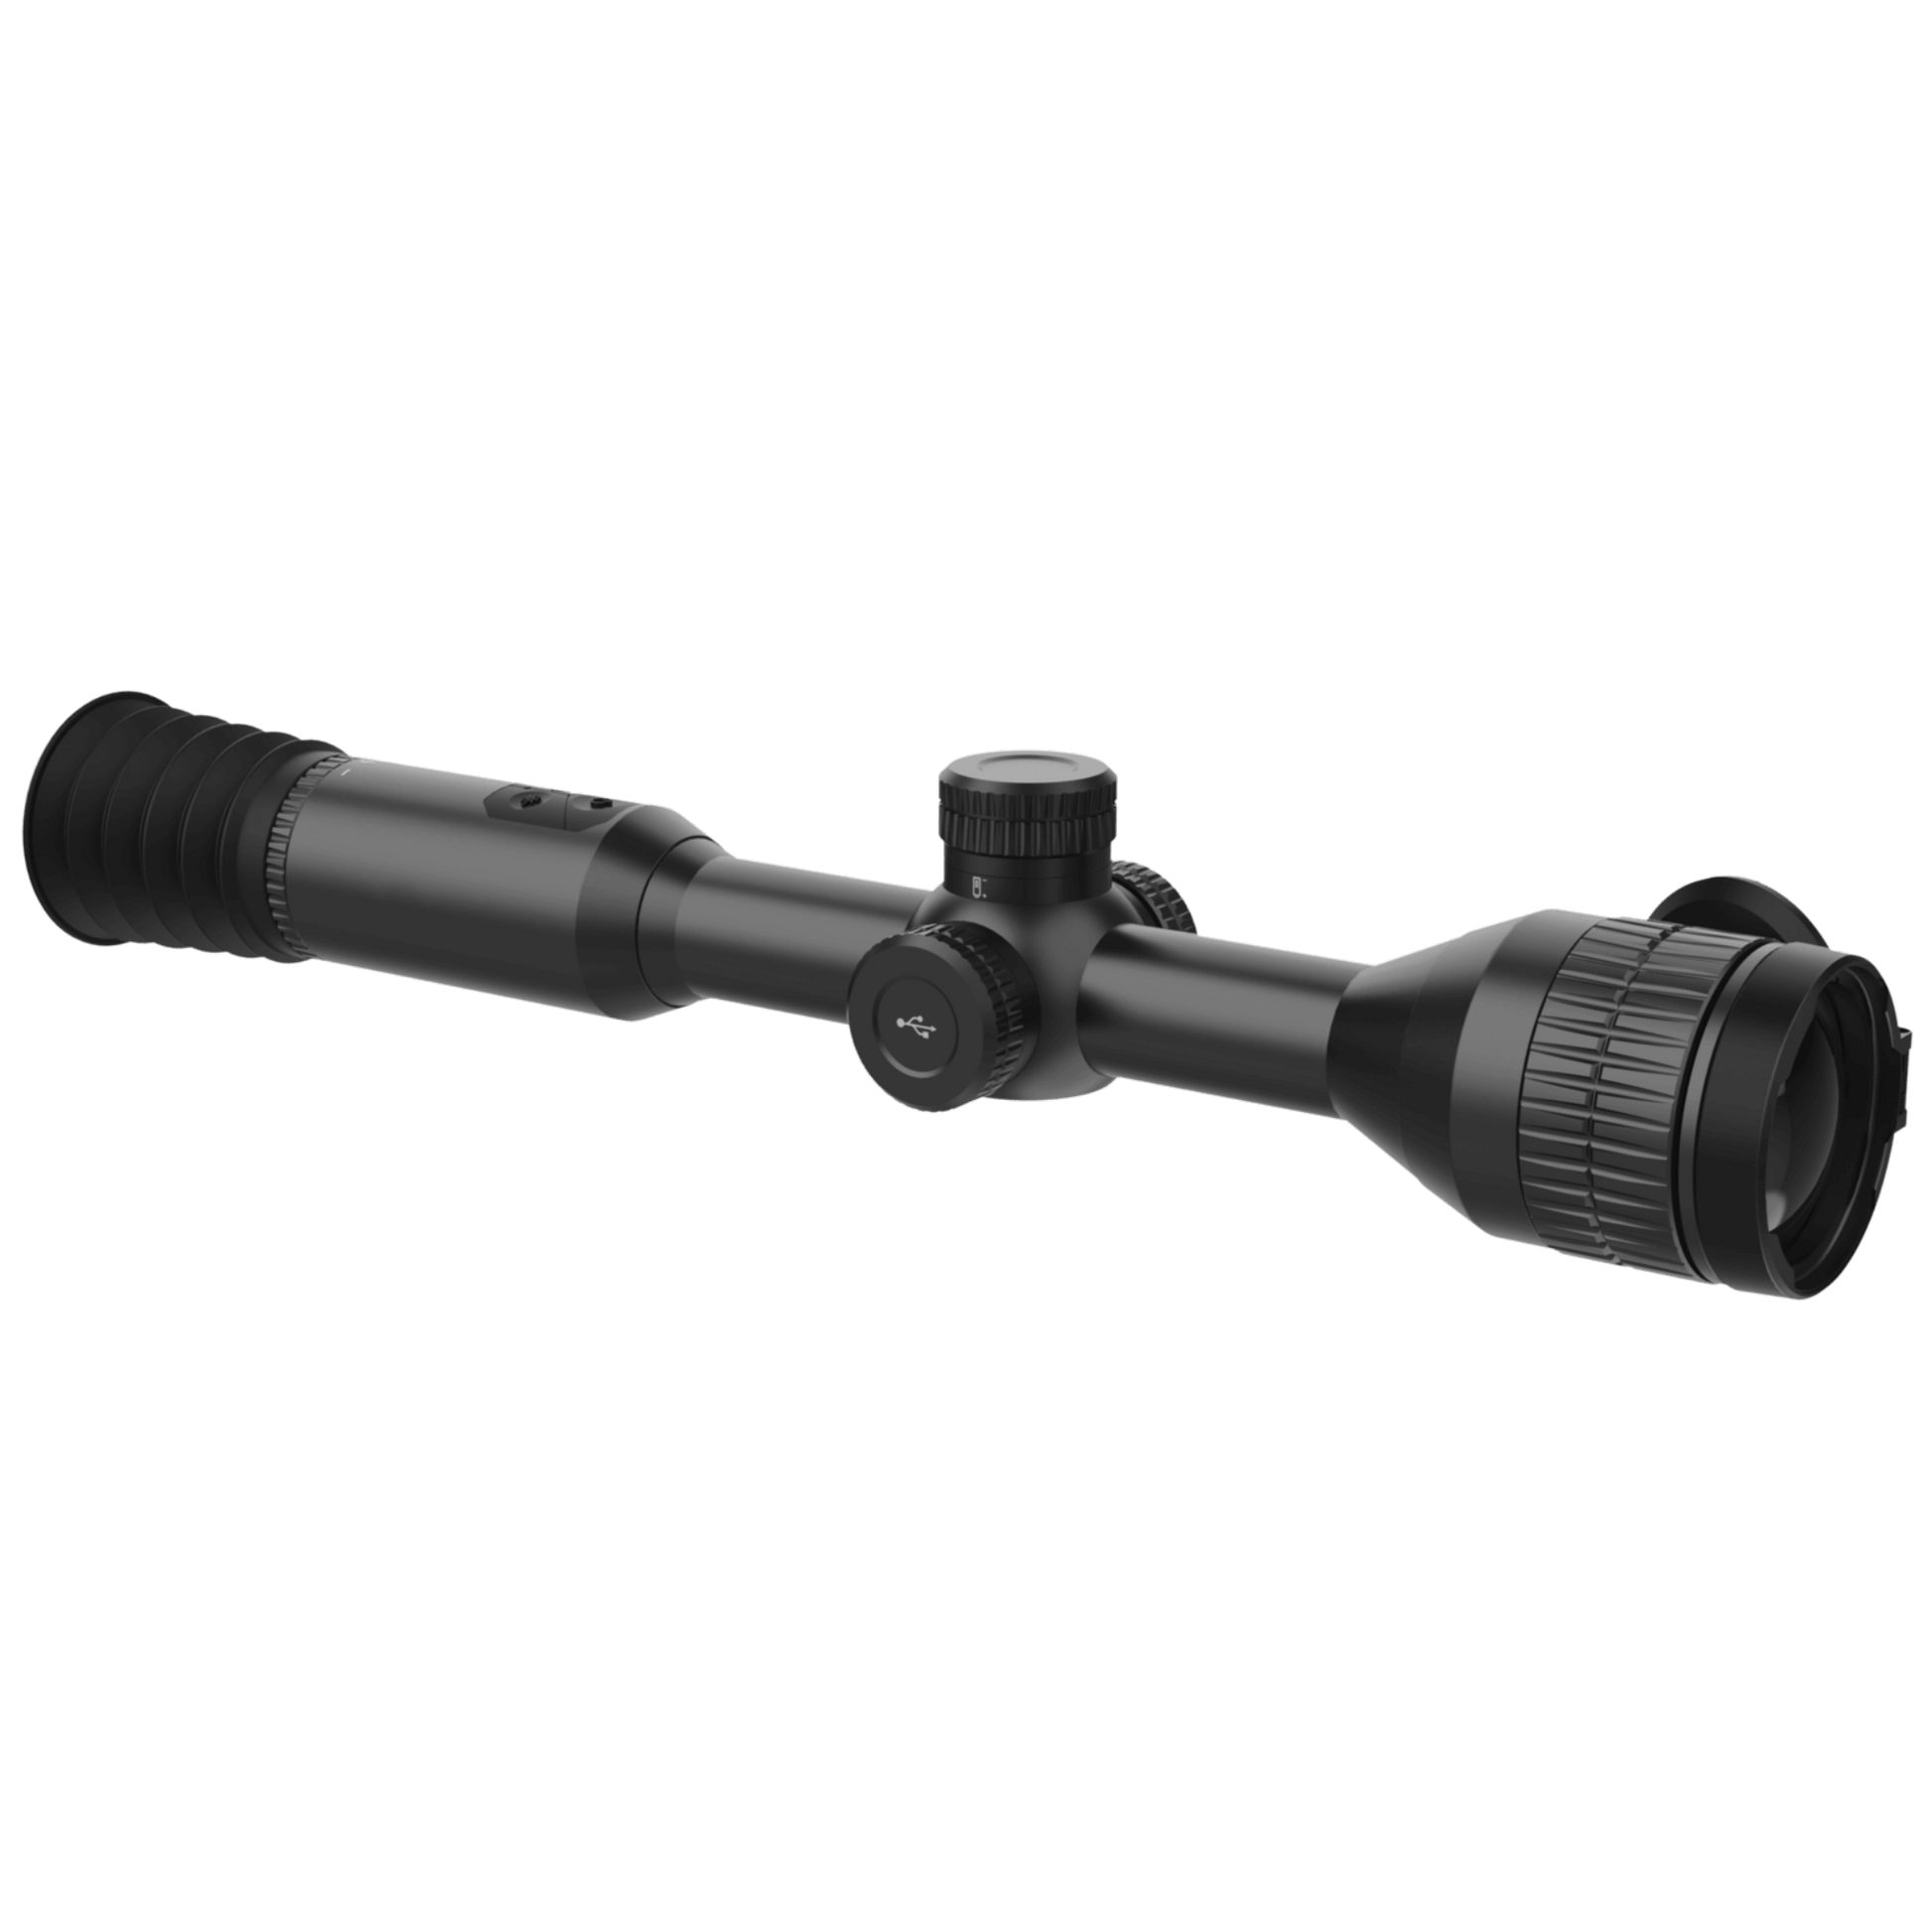 HikMicro Stellar SQ50 Thermal Imaging Scope Right Side View